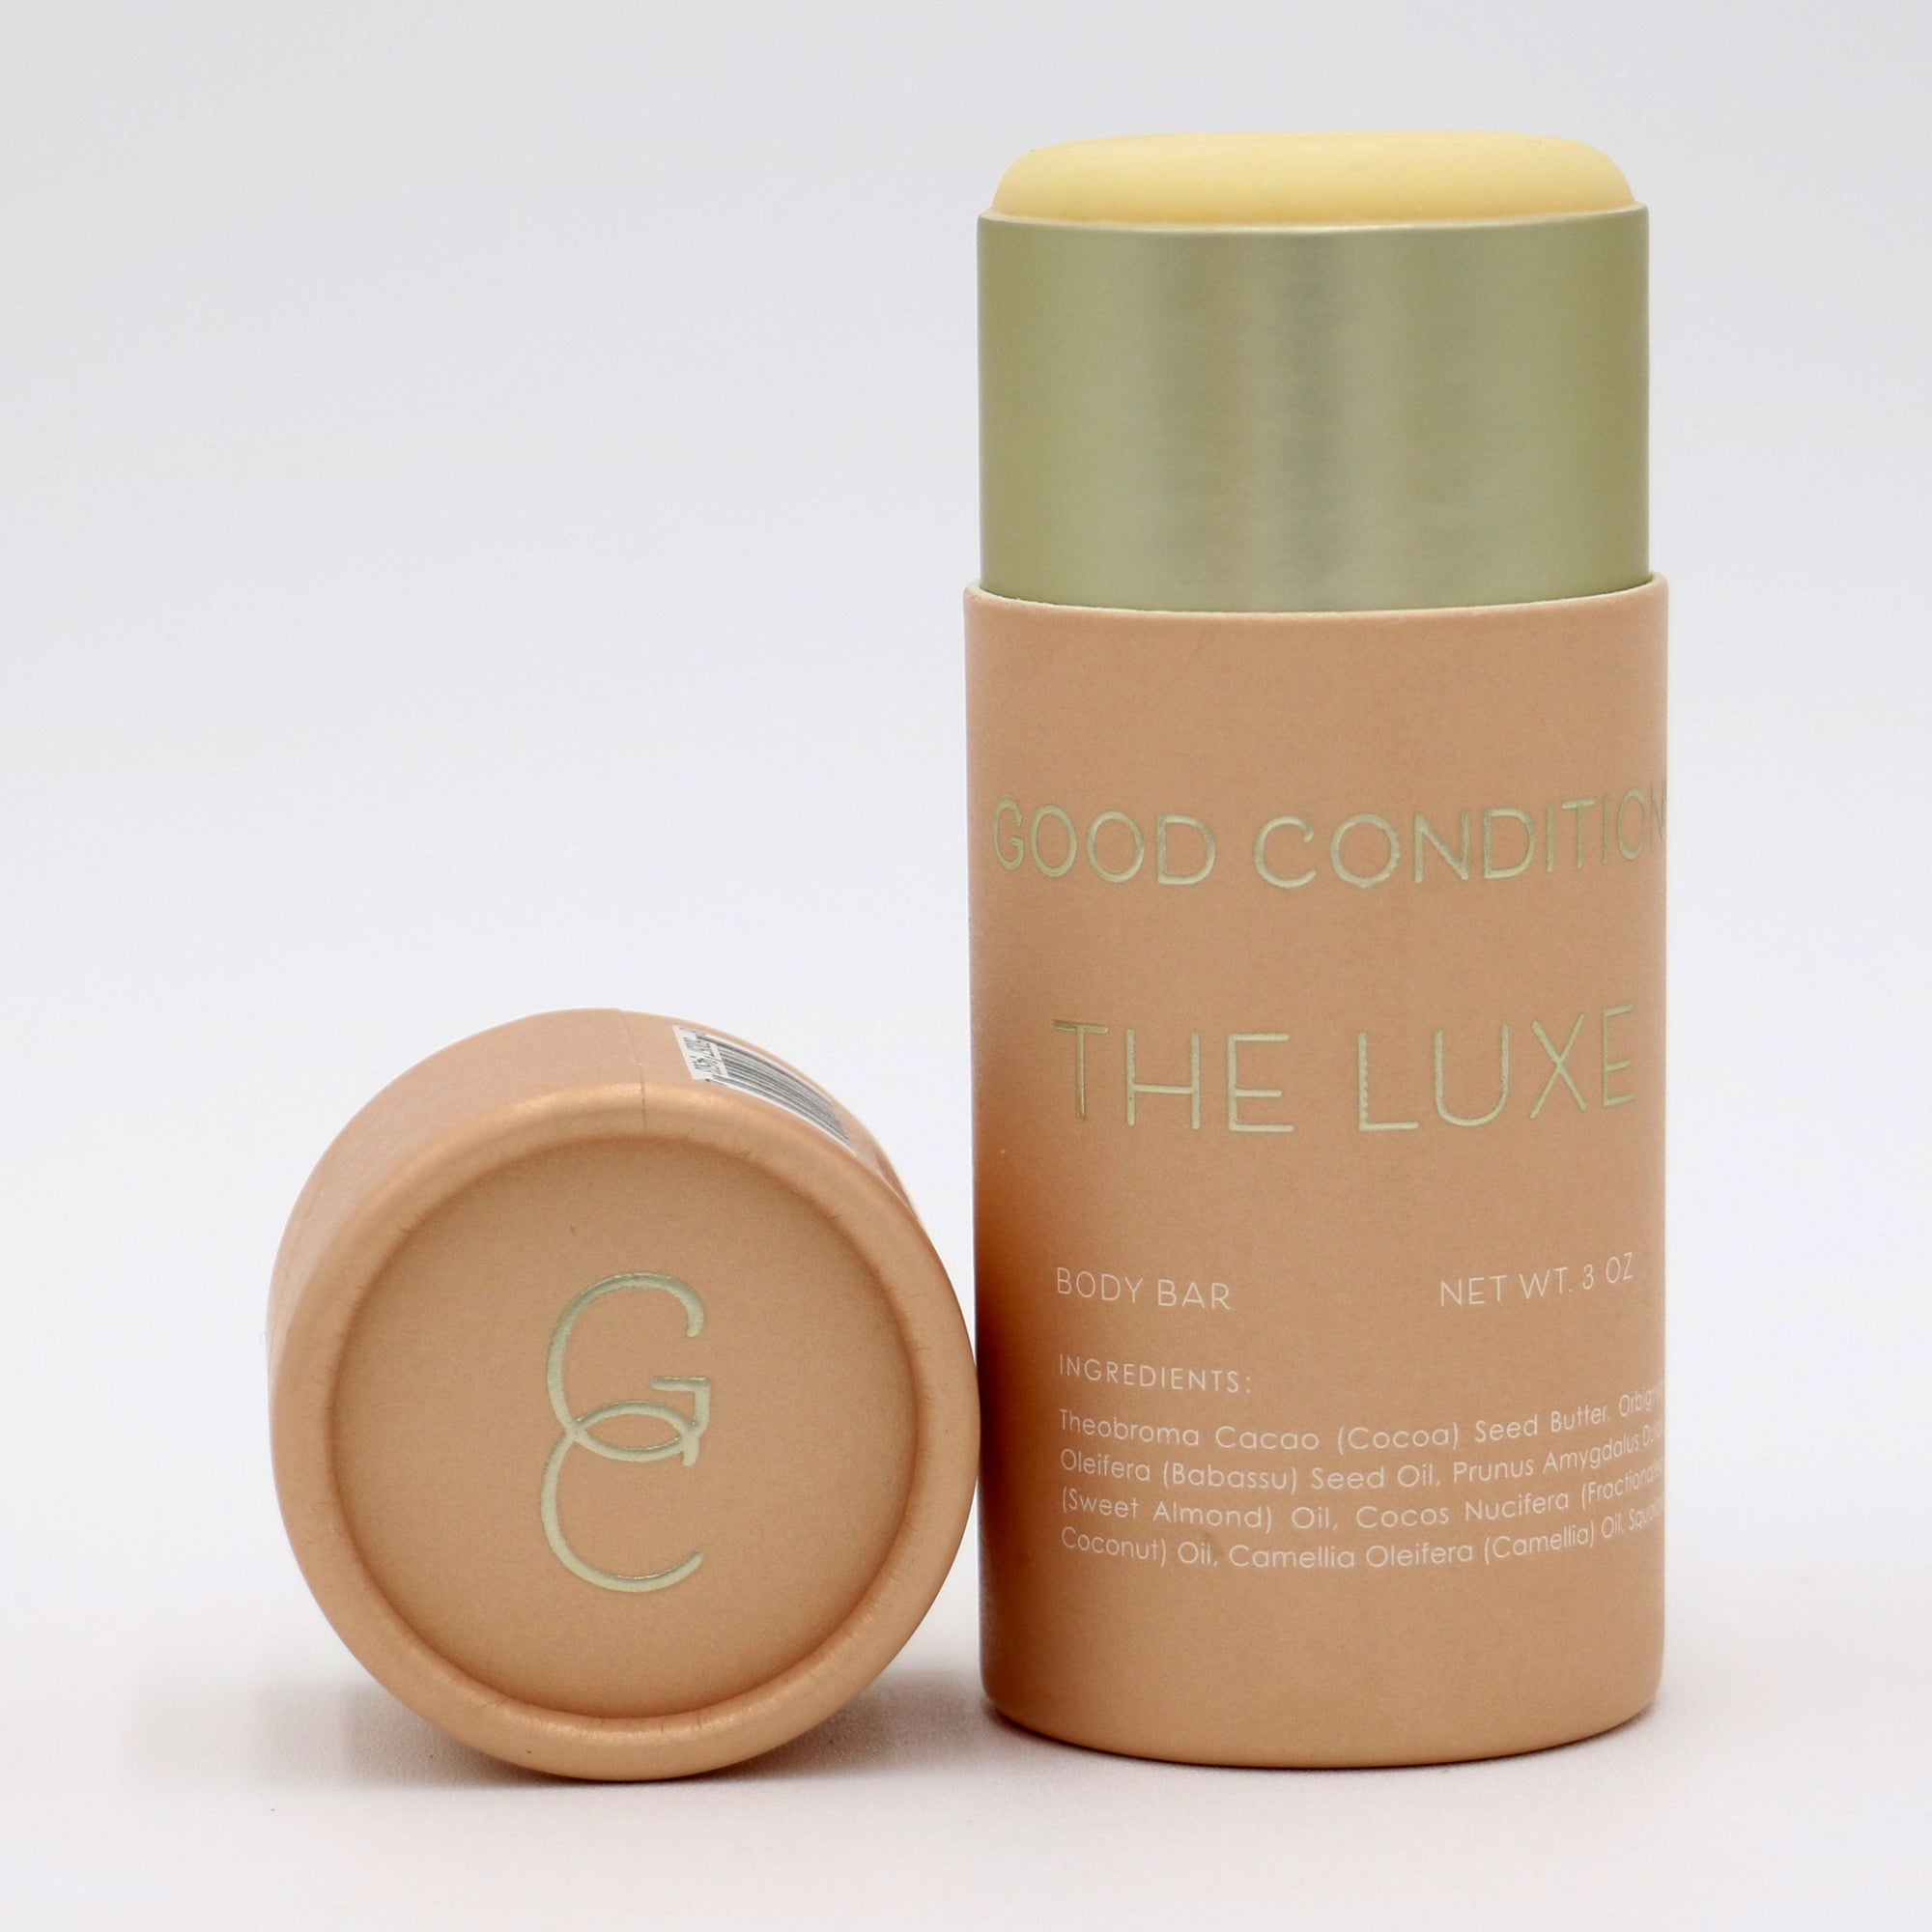 Good Condition The Luxe organic, waterless, plastic-free lotion bar.